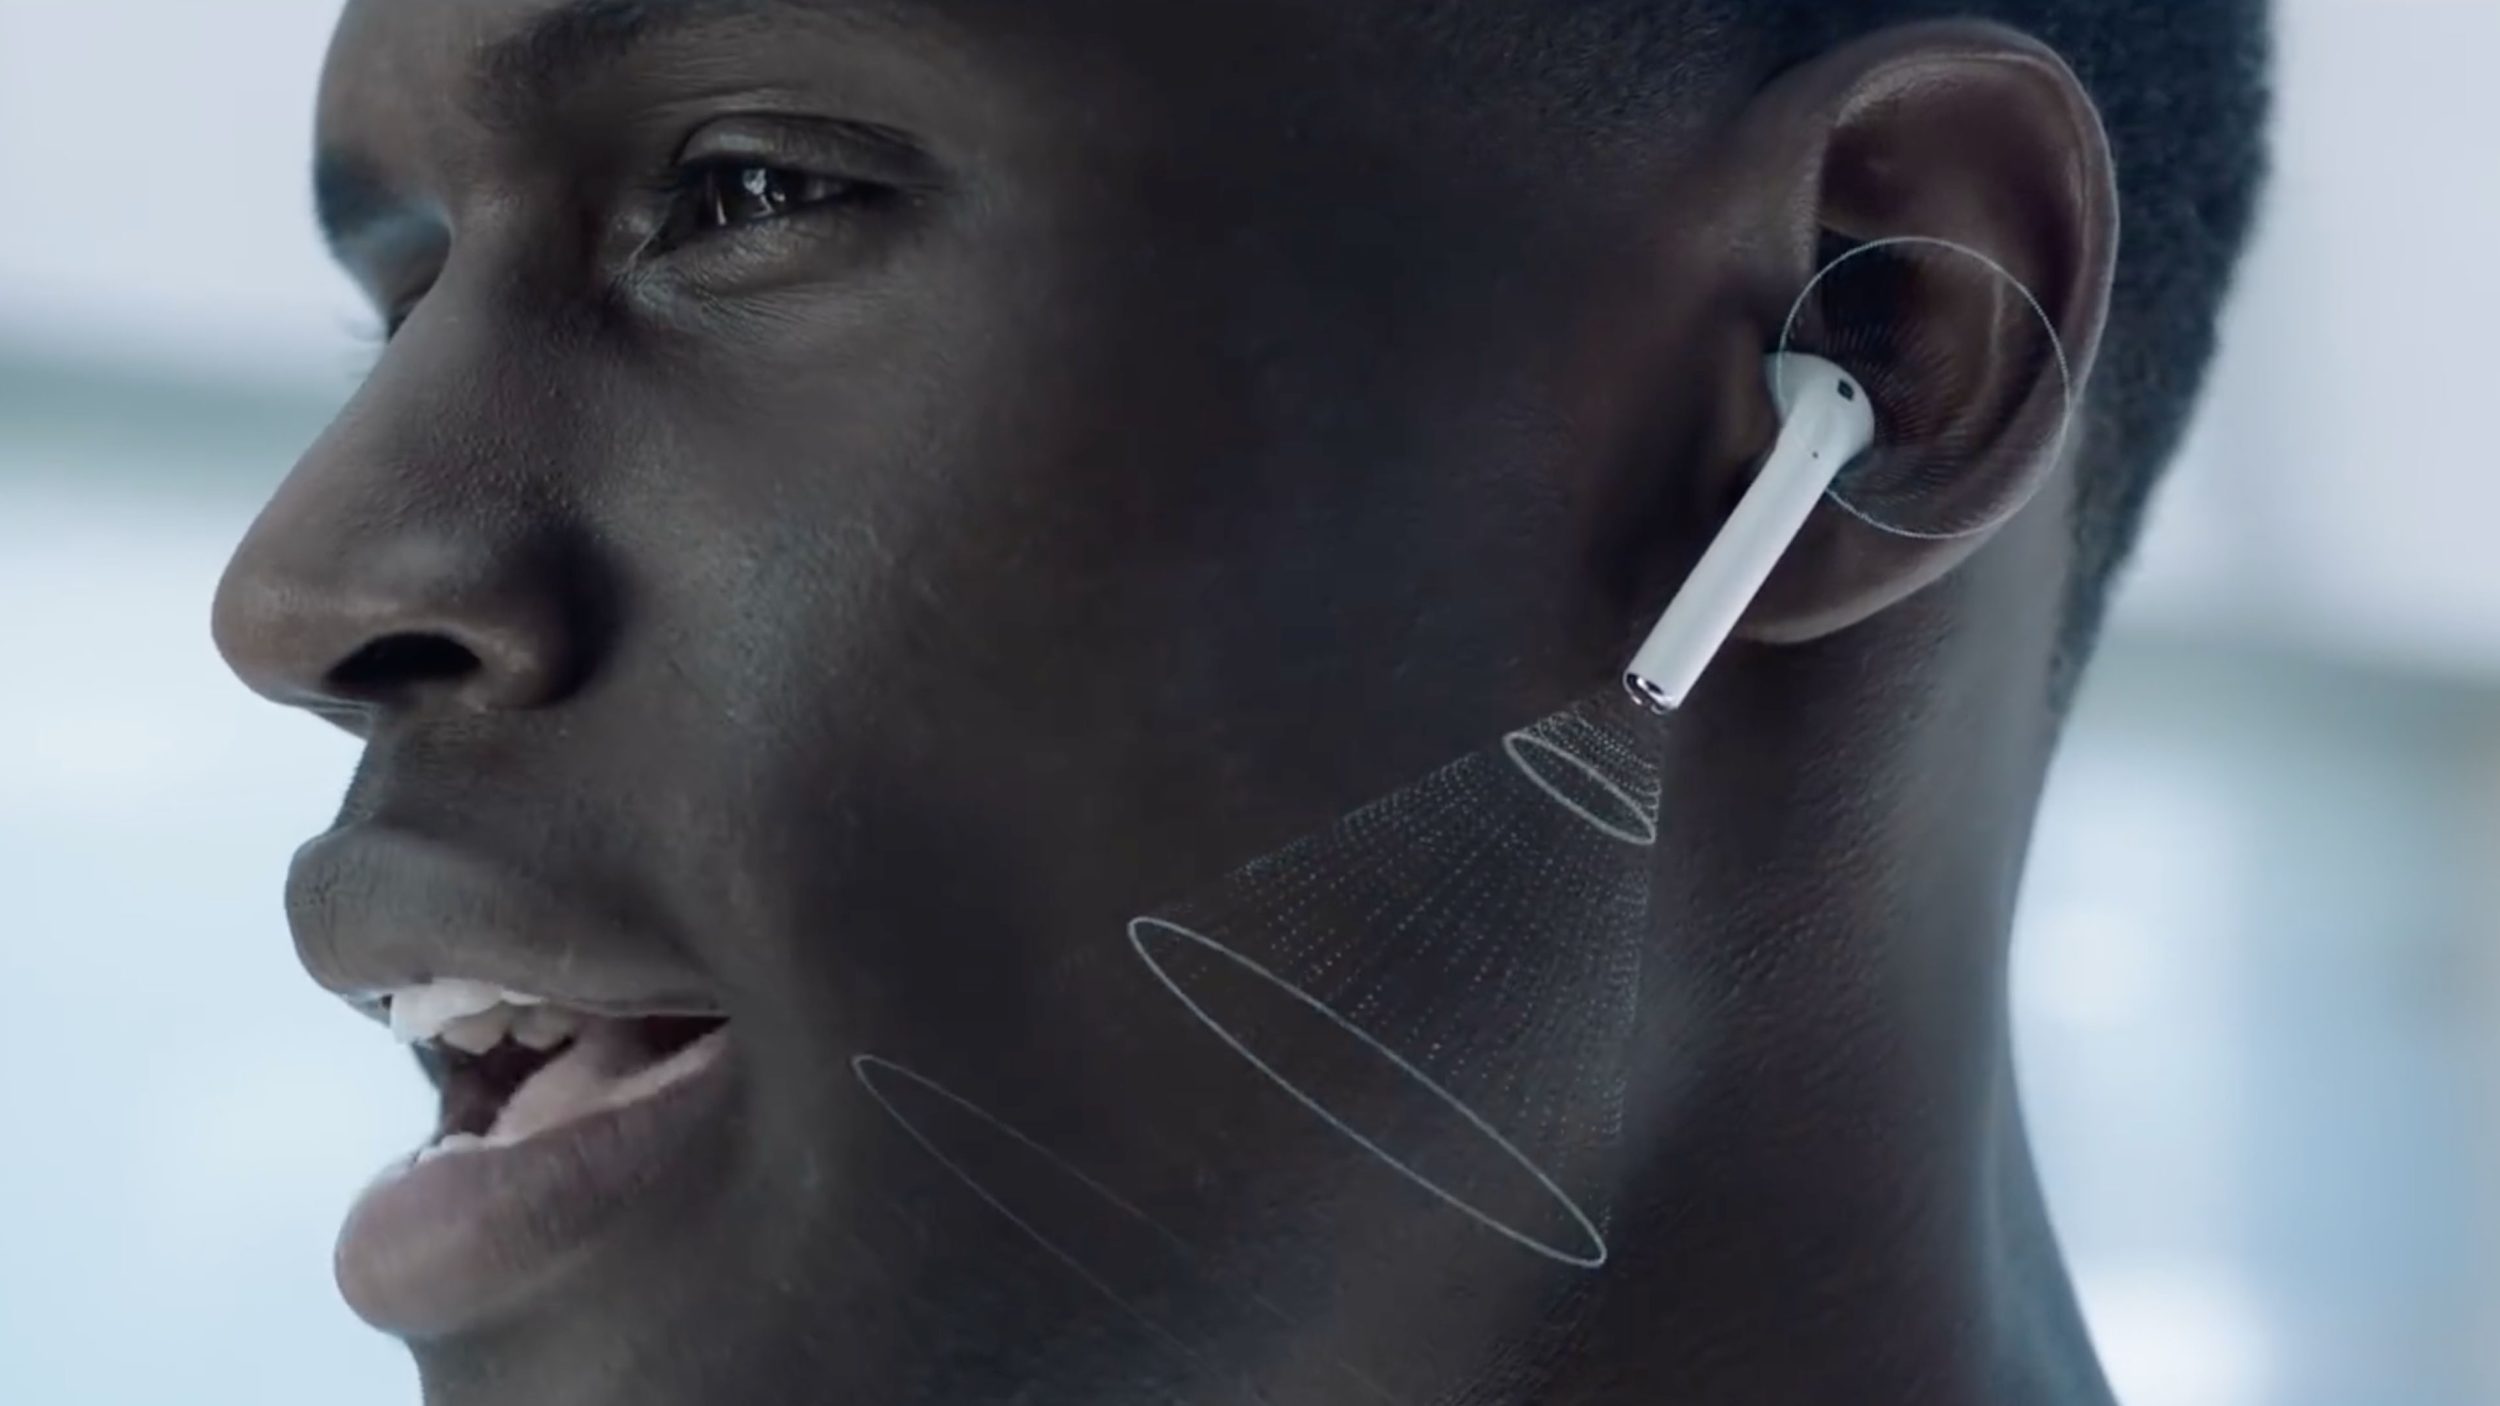 AirPods to Add Support for ‘Live Listen’ Feature With iOS 12